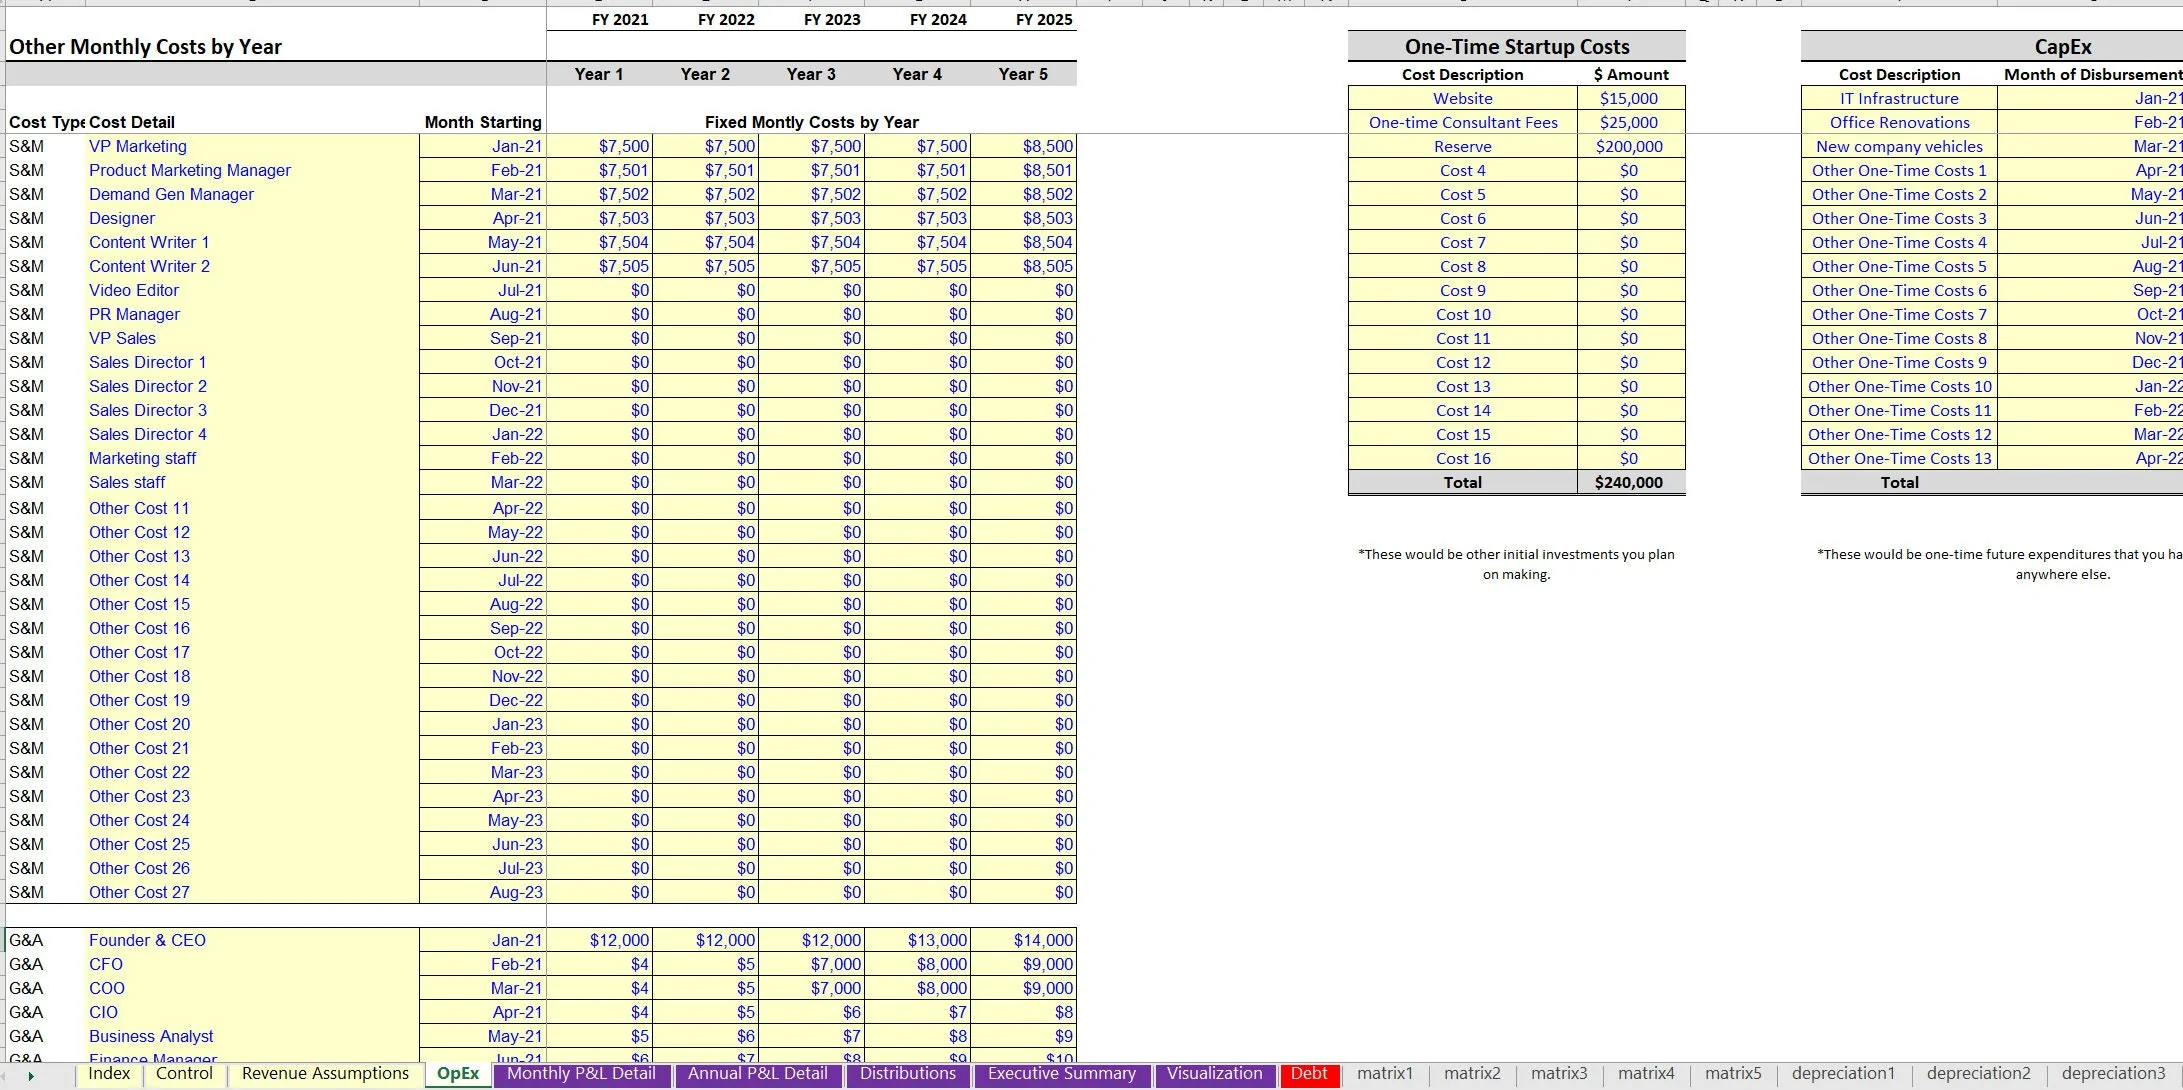 This is a partial preview of Equipment & Furniture Rental Financial Model (Excel workbook (XLSX)). 